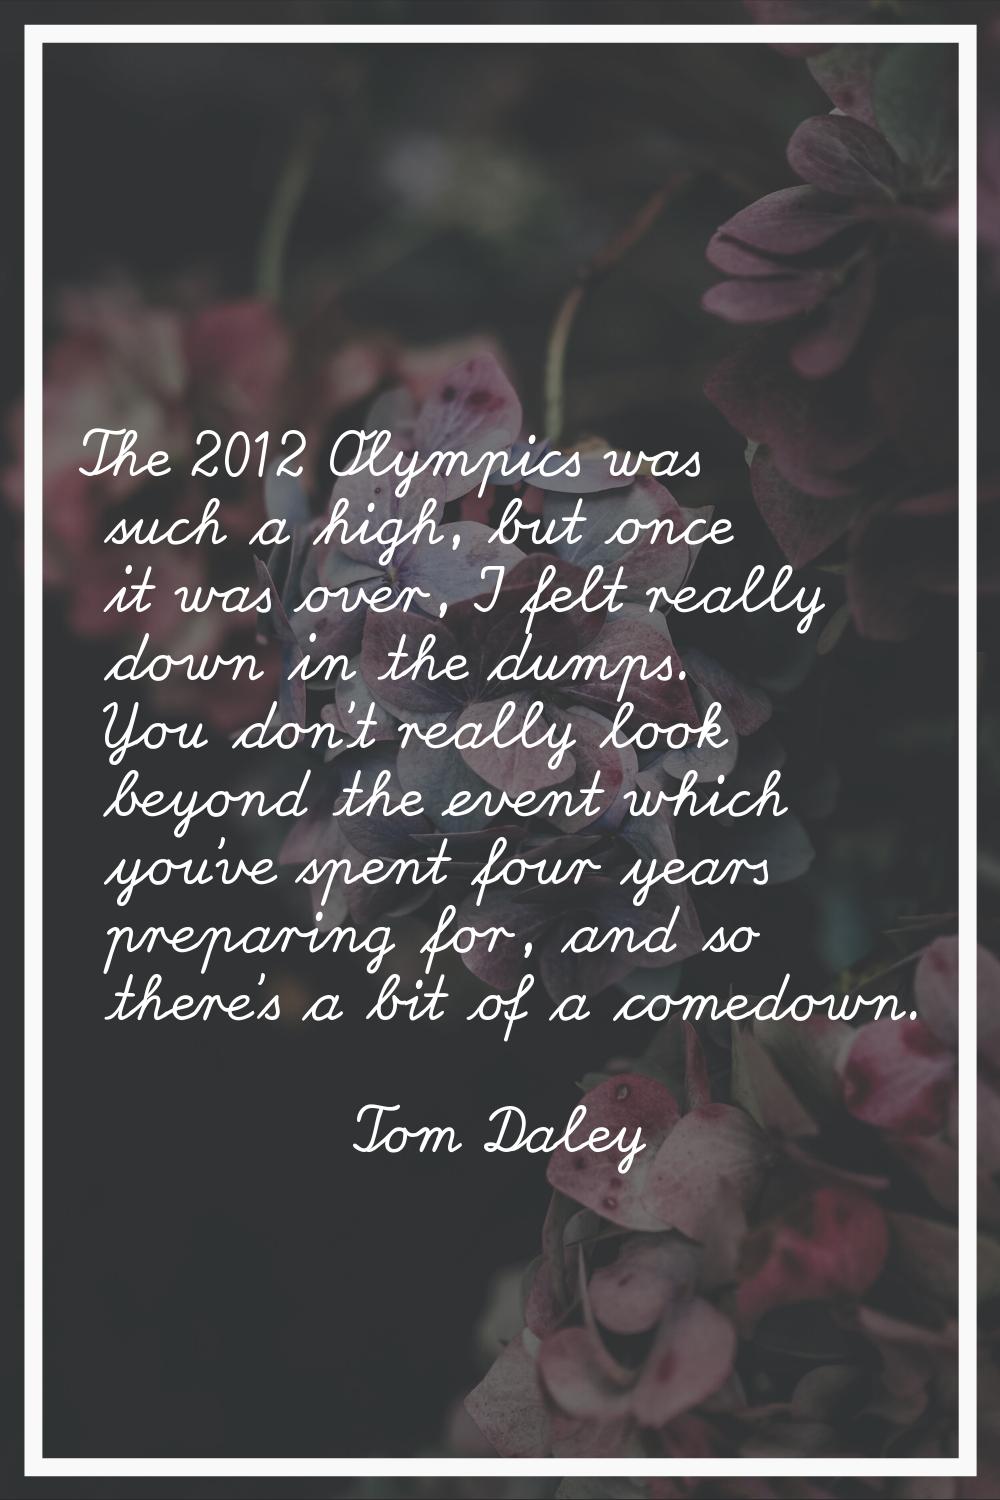 The 2012 Olympics was such a high, but once it was over, I felt really down in the dumps. You don't